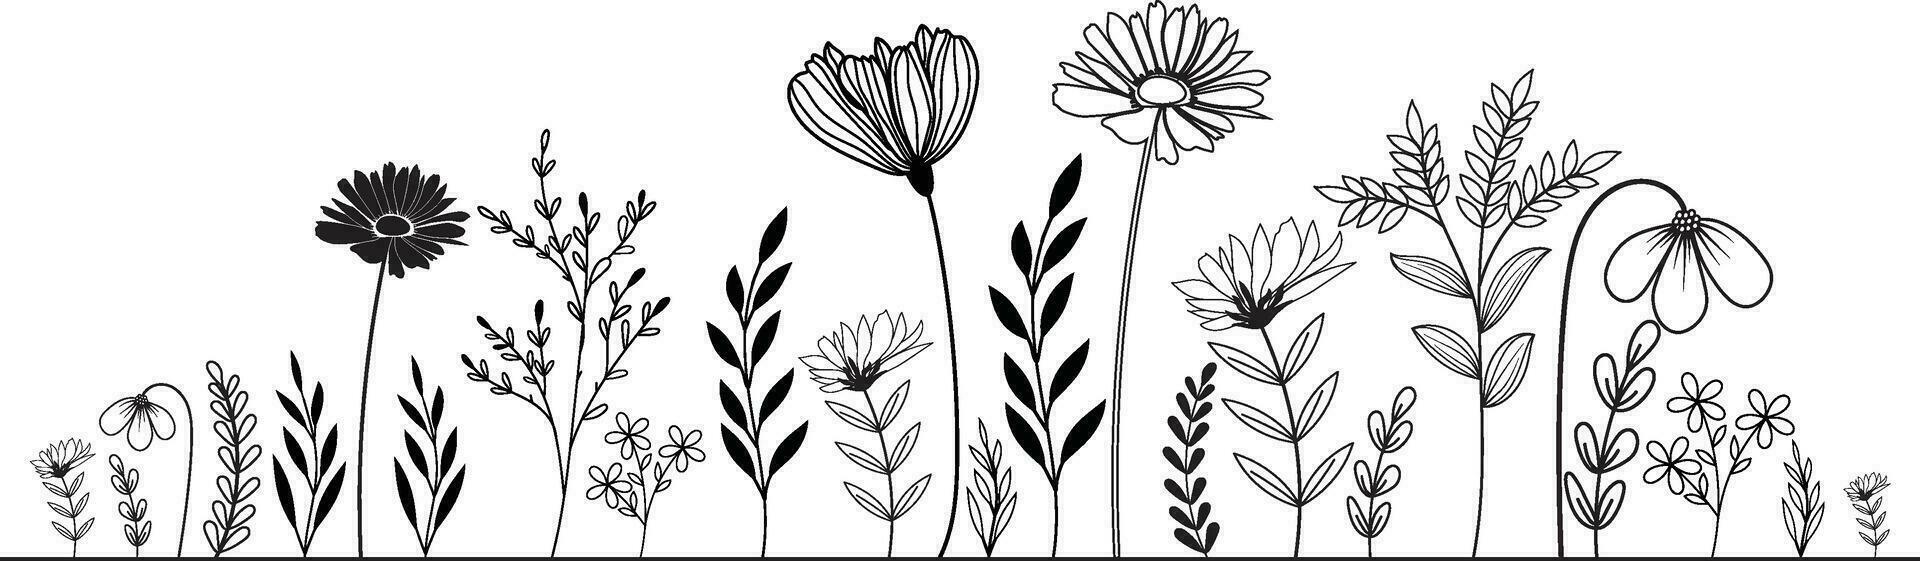 Hand-drawn wildflowers meadow. Black and white doodle wildflowers and grass plants. Monochrome floral elements. vector